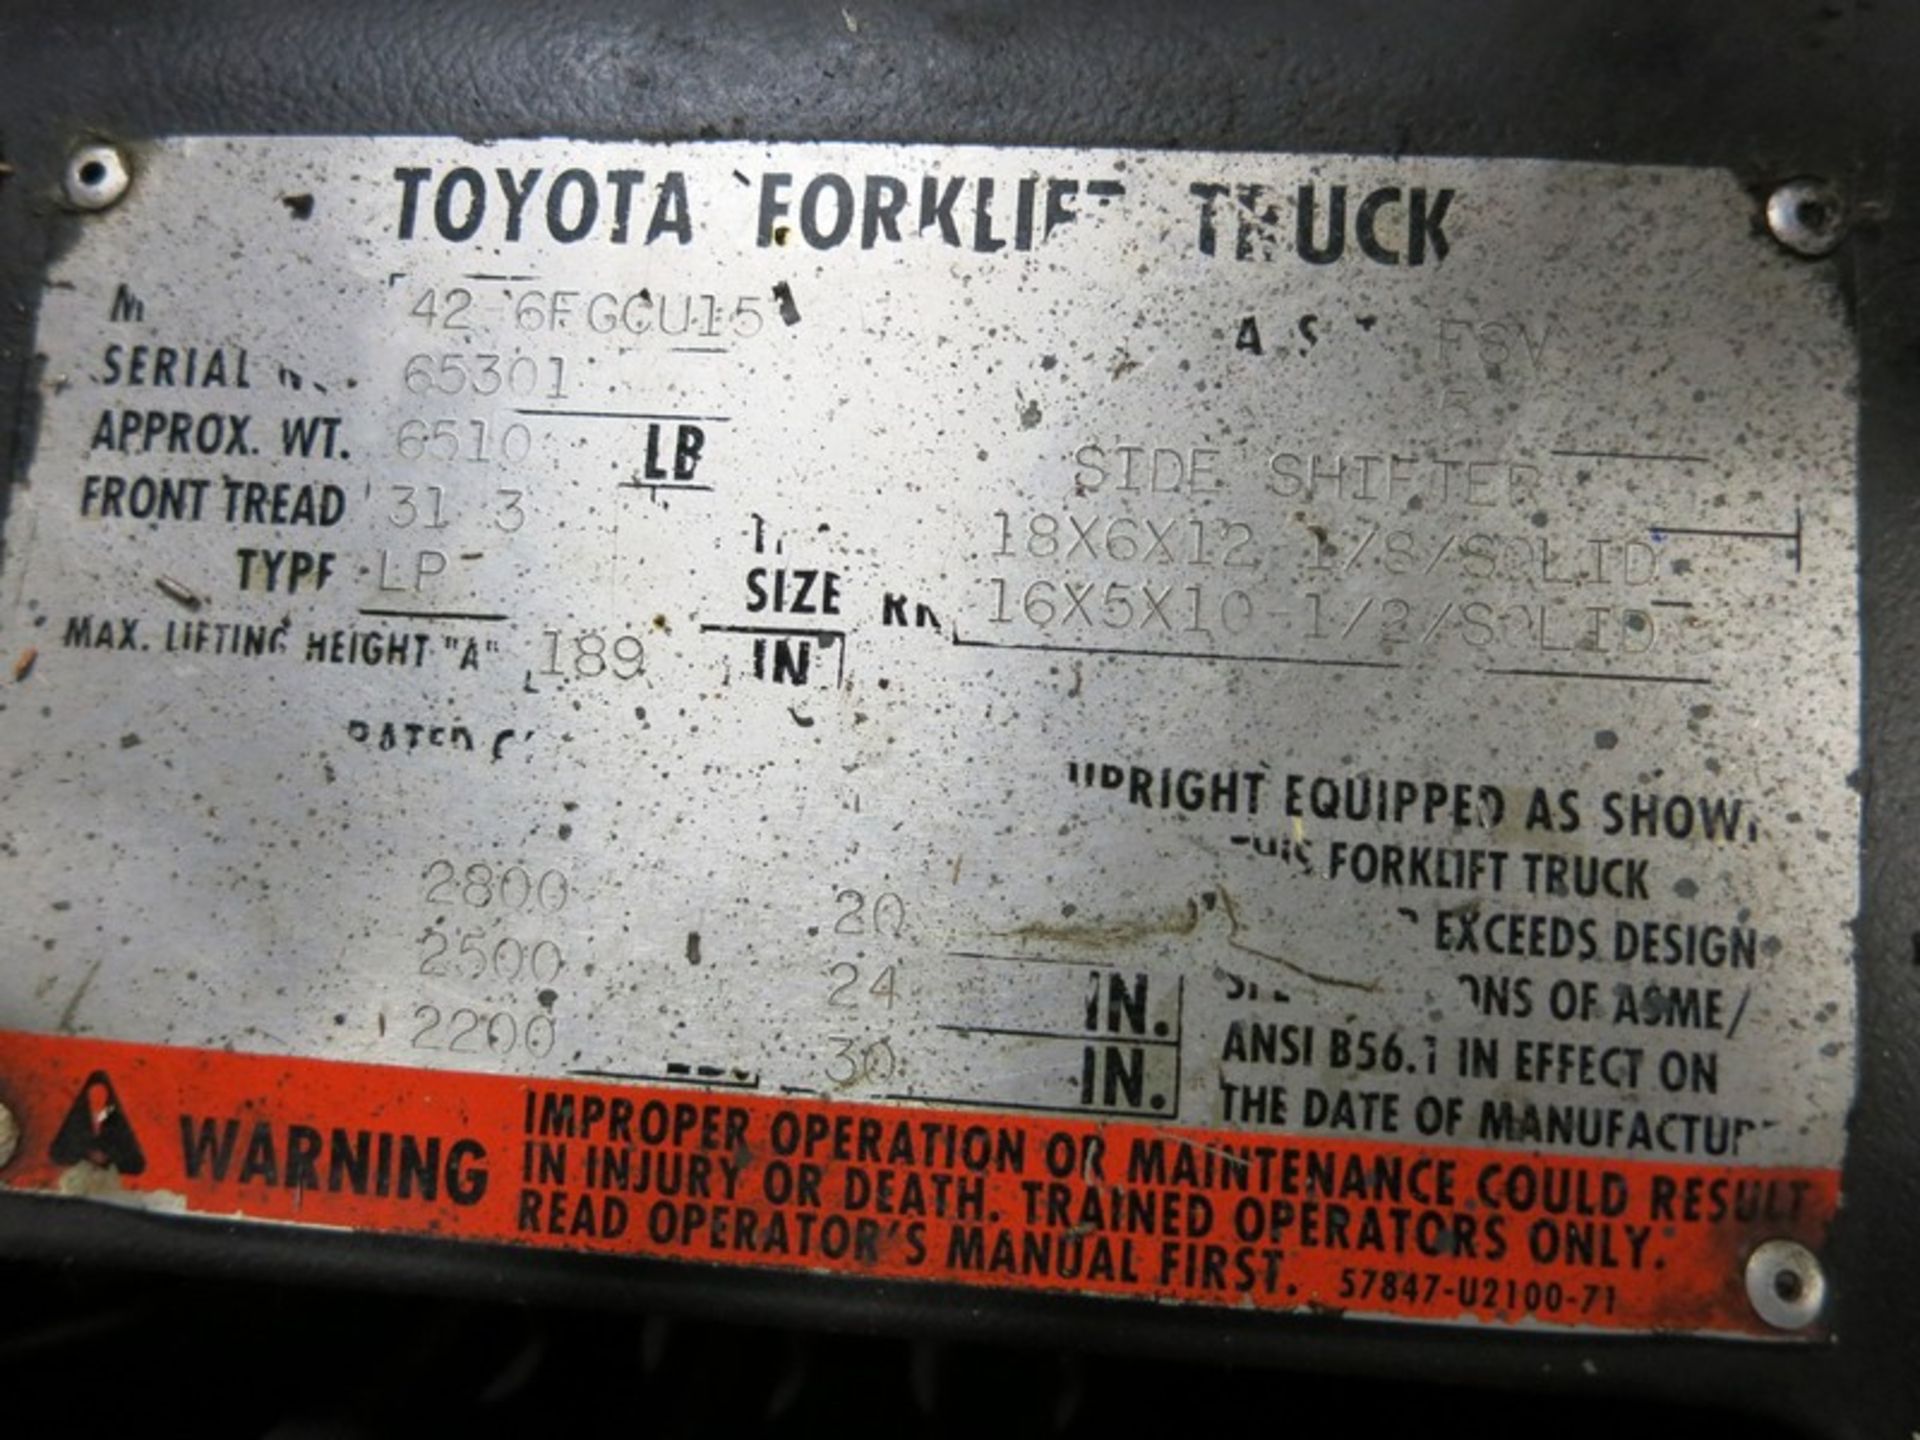 2,500 lbs. Toyota Forklift Truck Model 42-6FGCU15, S/N 65301 (Late Delivery) - Image 4 of 4